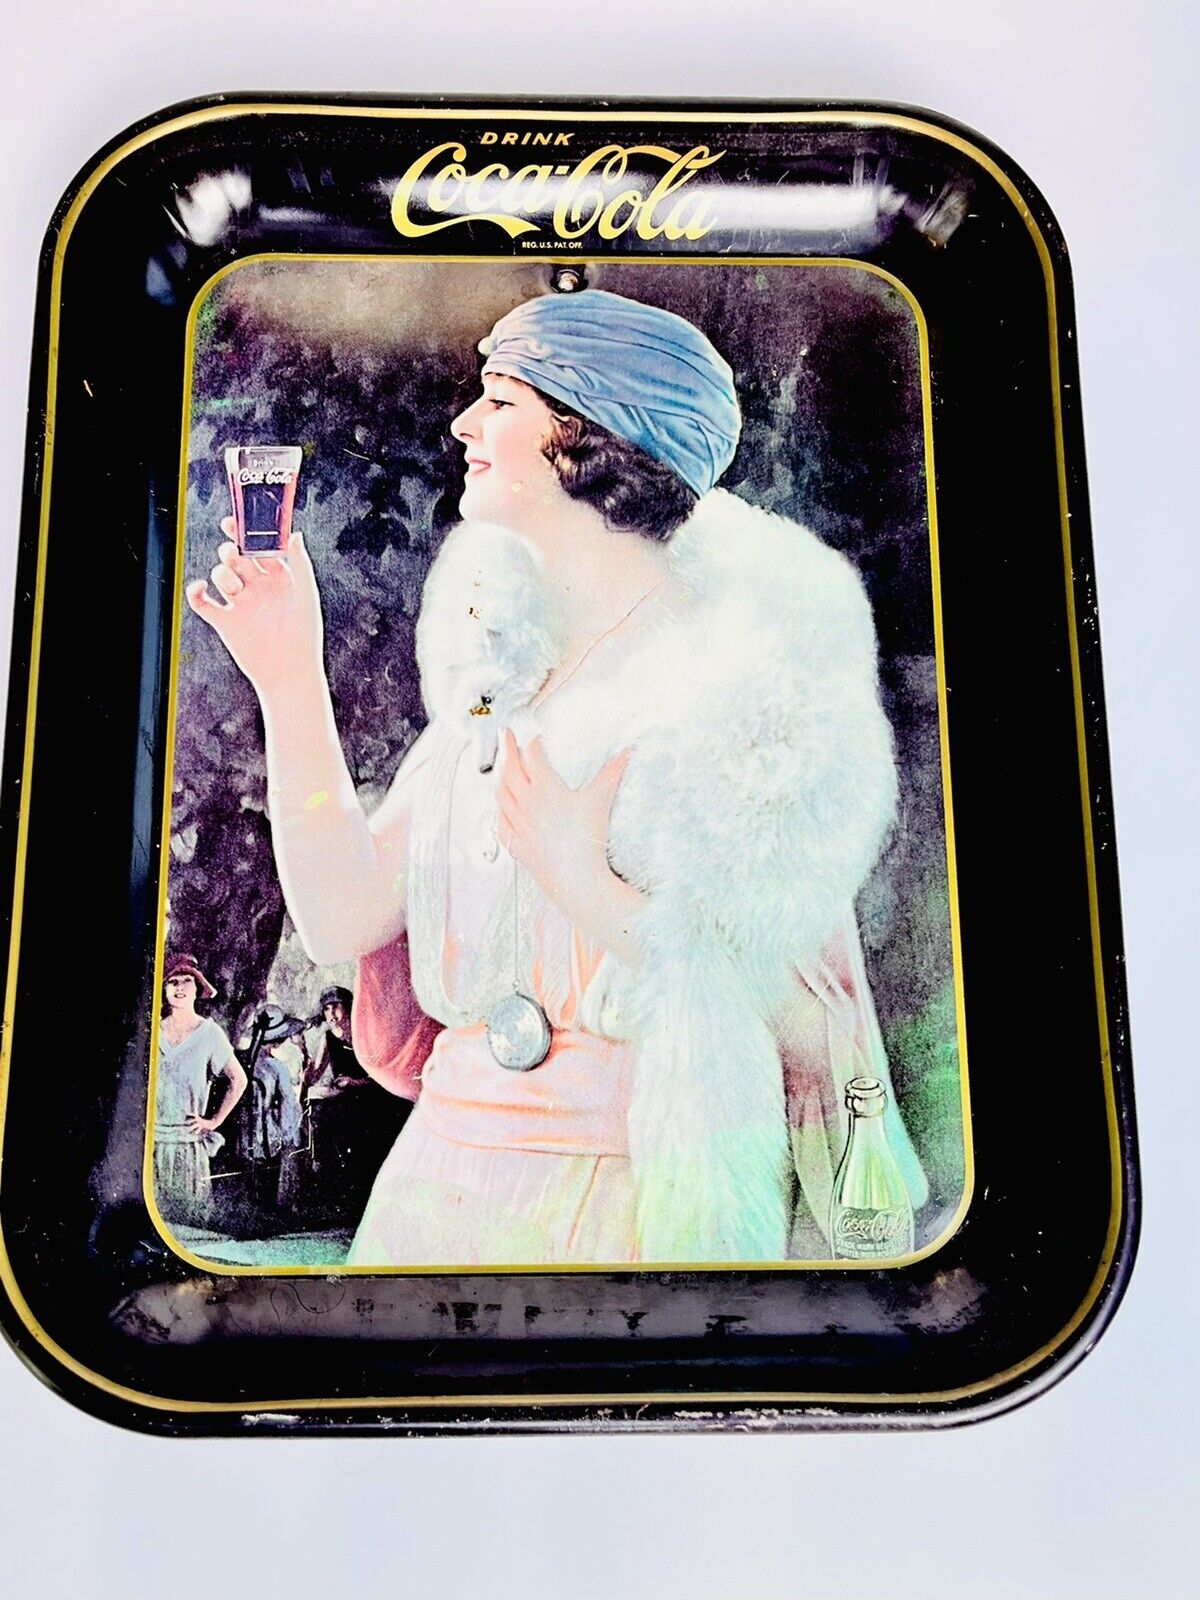 Vintage Coca Cola Girl at a Party Tray-1925 Advertising-Made in 1973